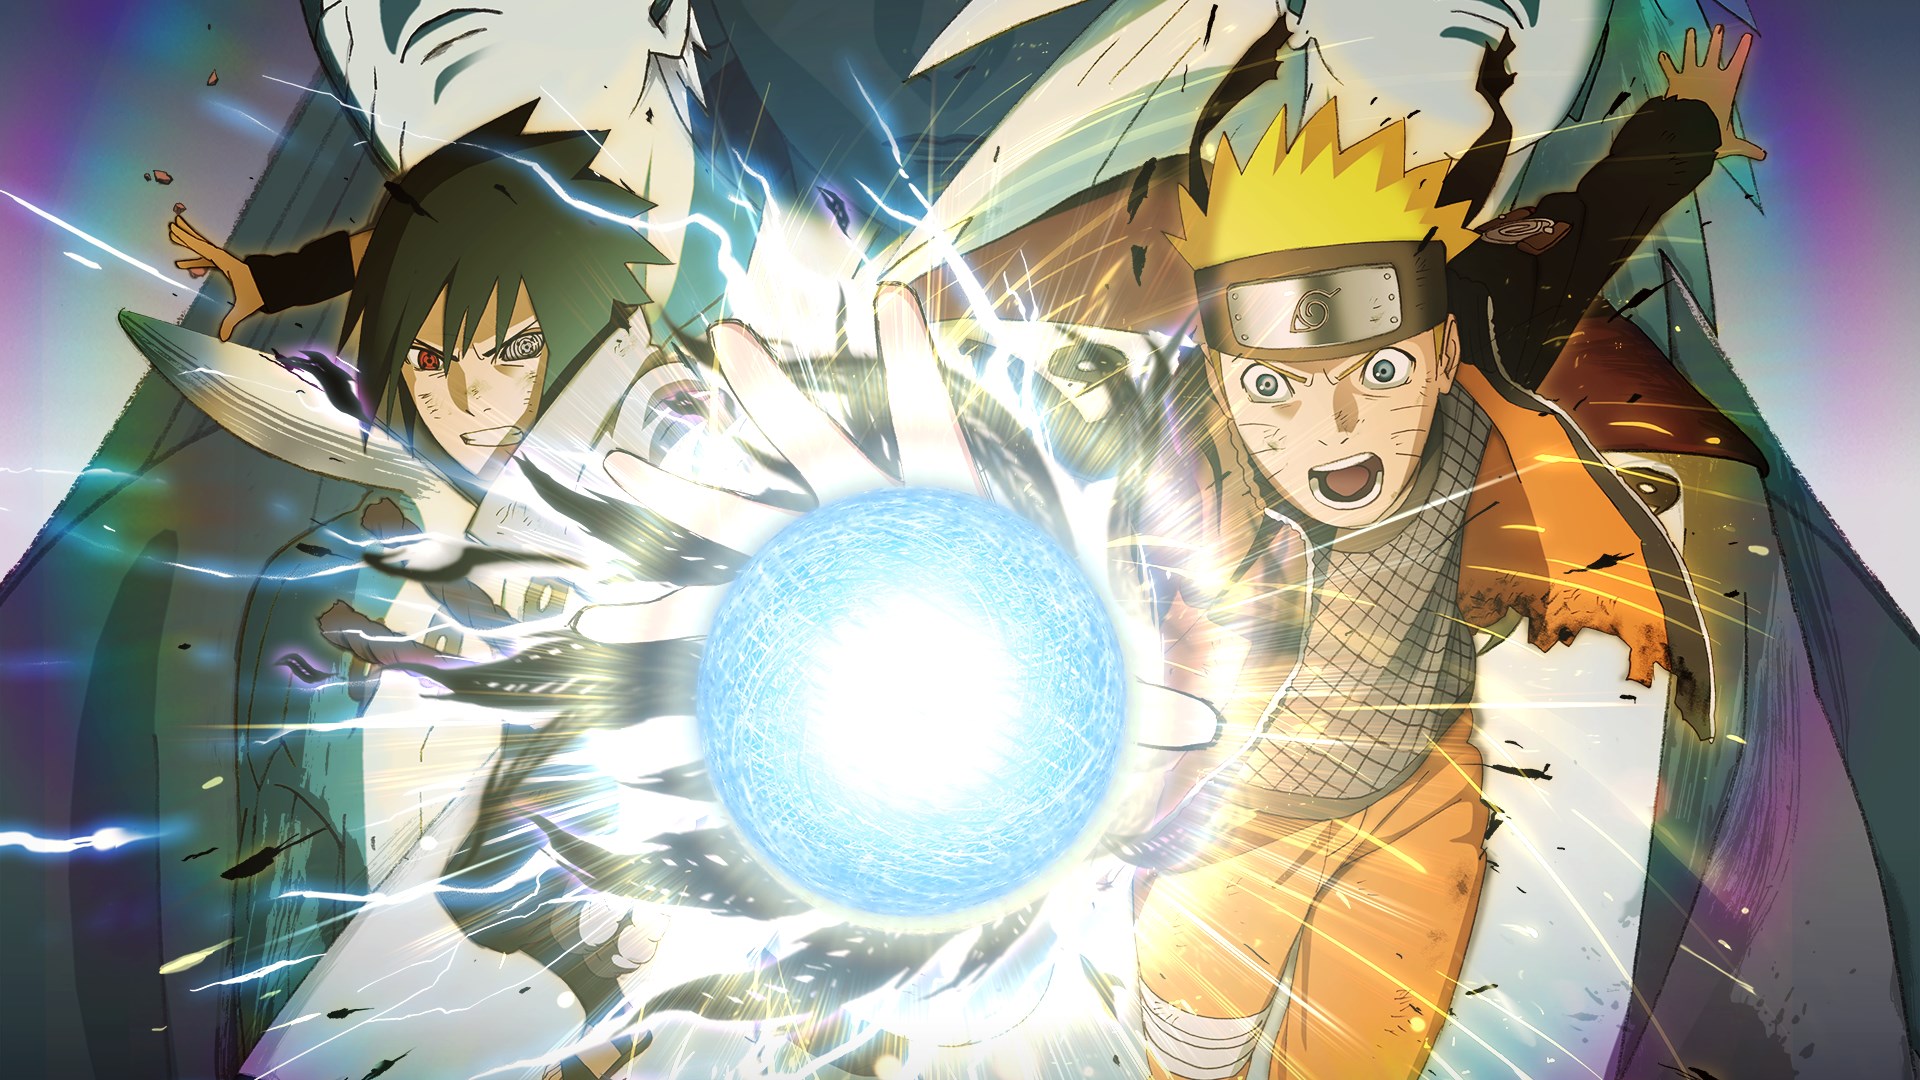 Ultimate Ninja Storm 4 becomes one of the best selling fighting games